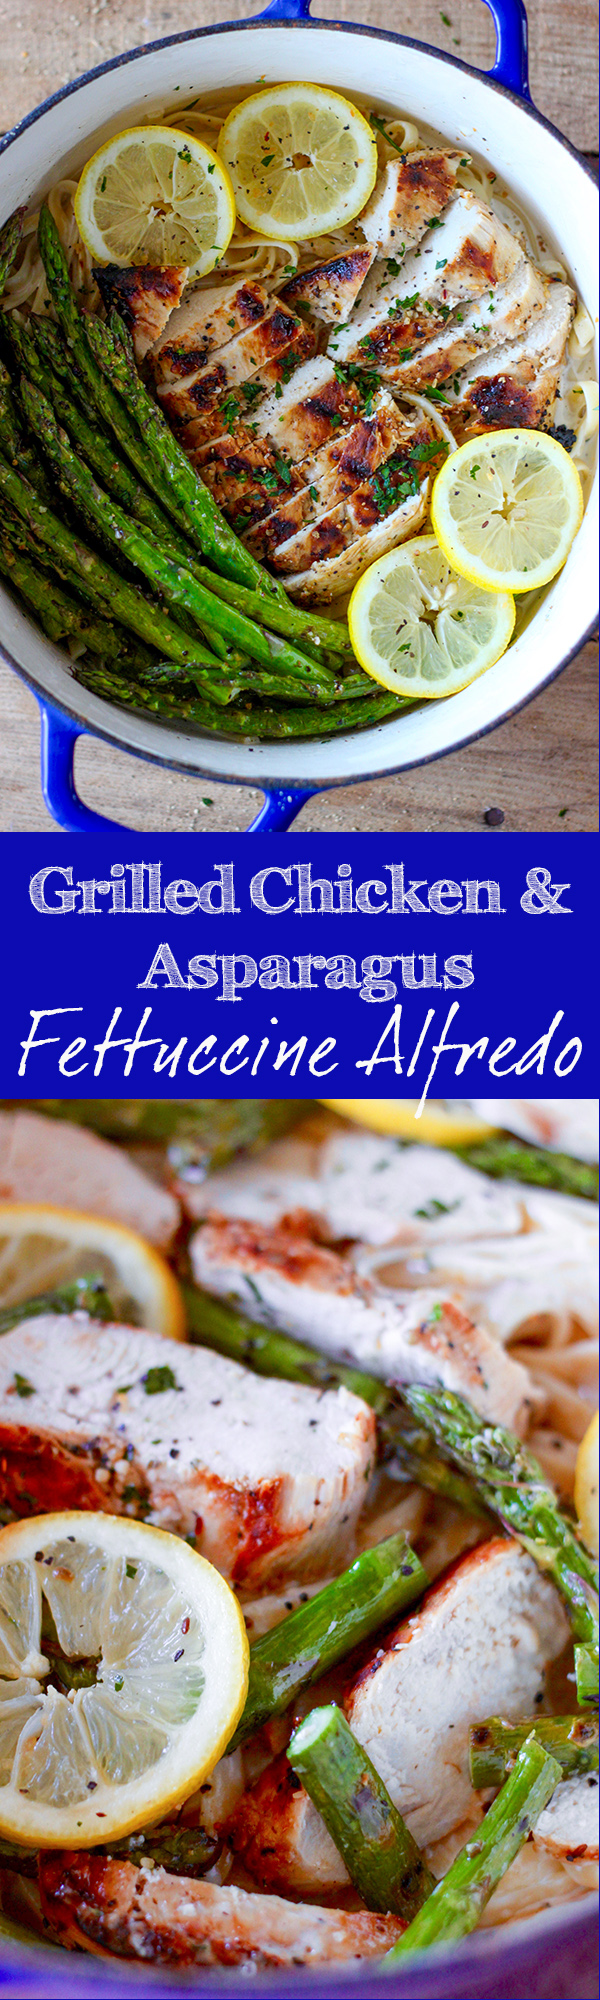 Grilled Chicken and Asparagus Fettuccine Alfredo - real homemade alfredo sauce with juicy lemony grilled chicken and asparagus. This pasta recipe is so delicious!